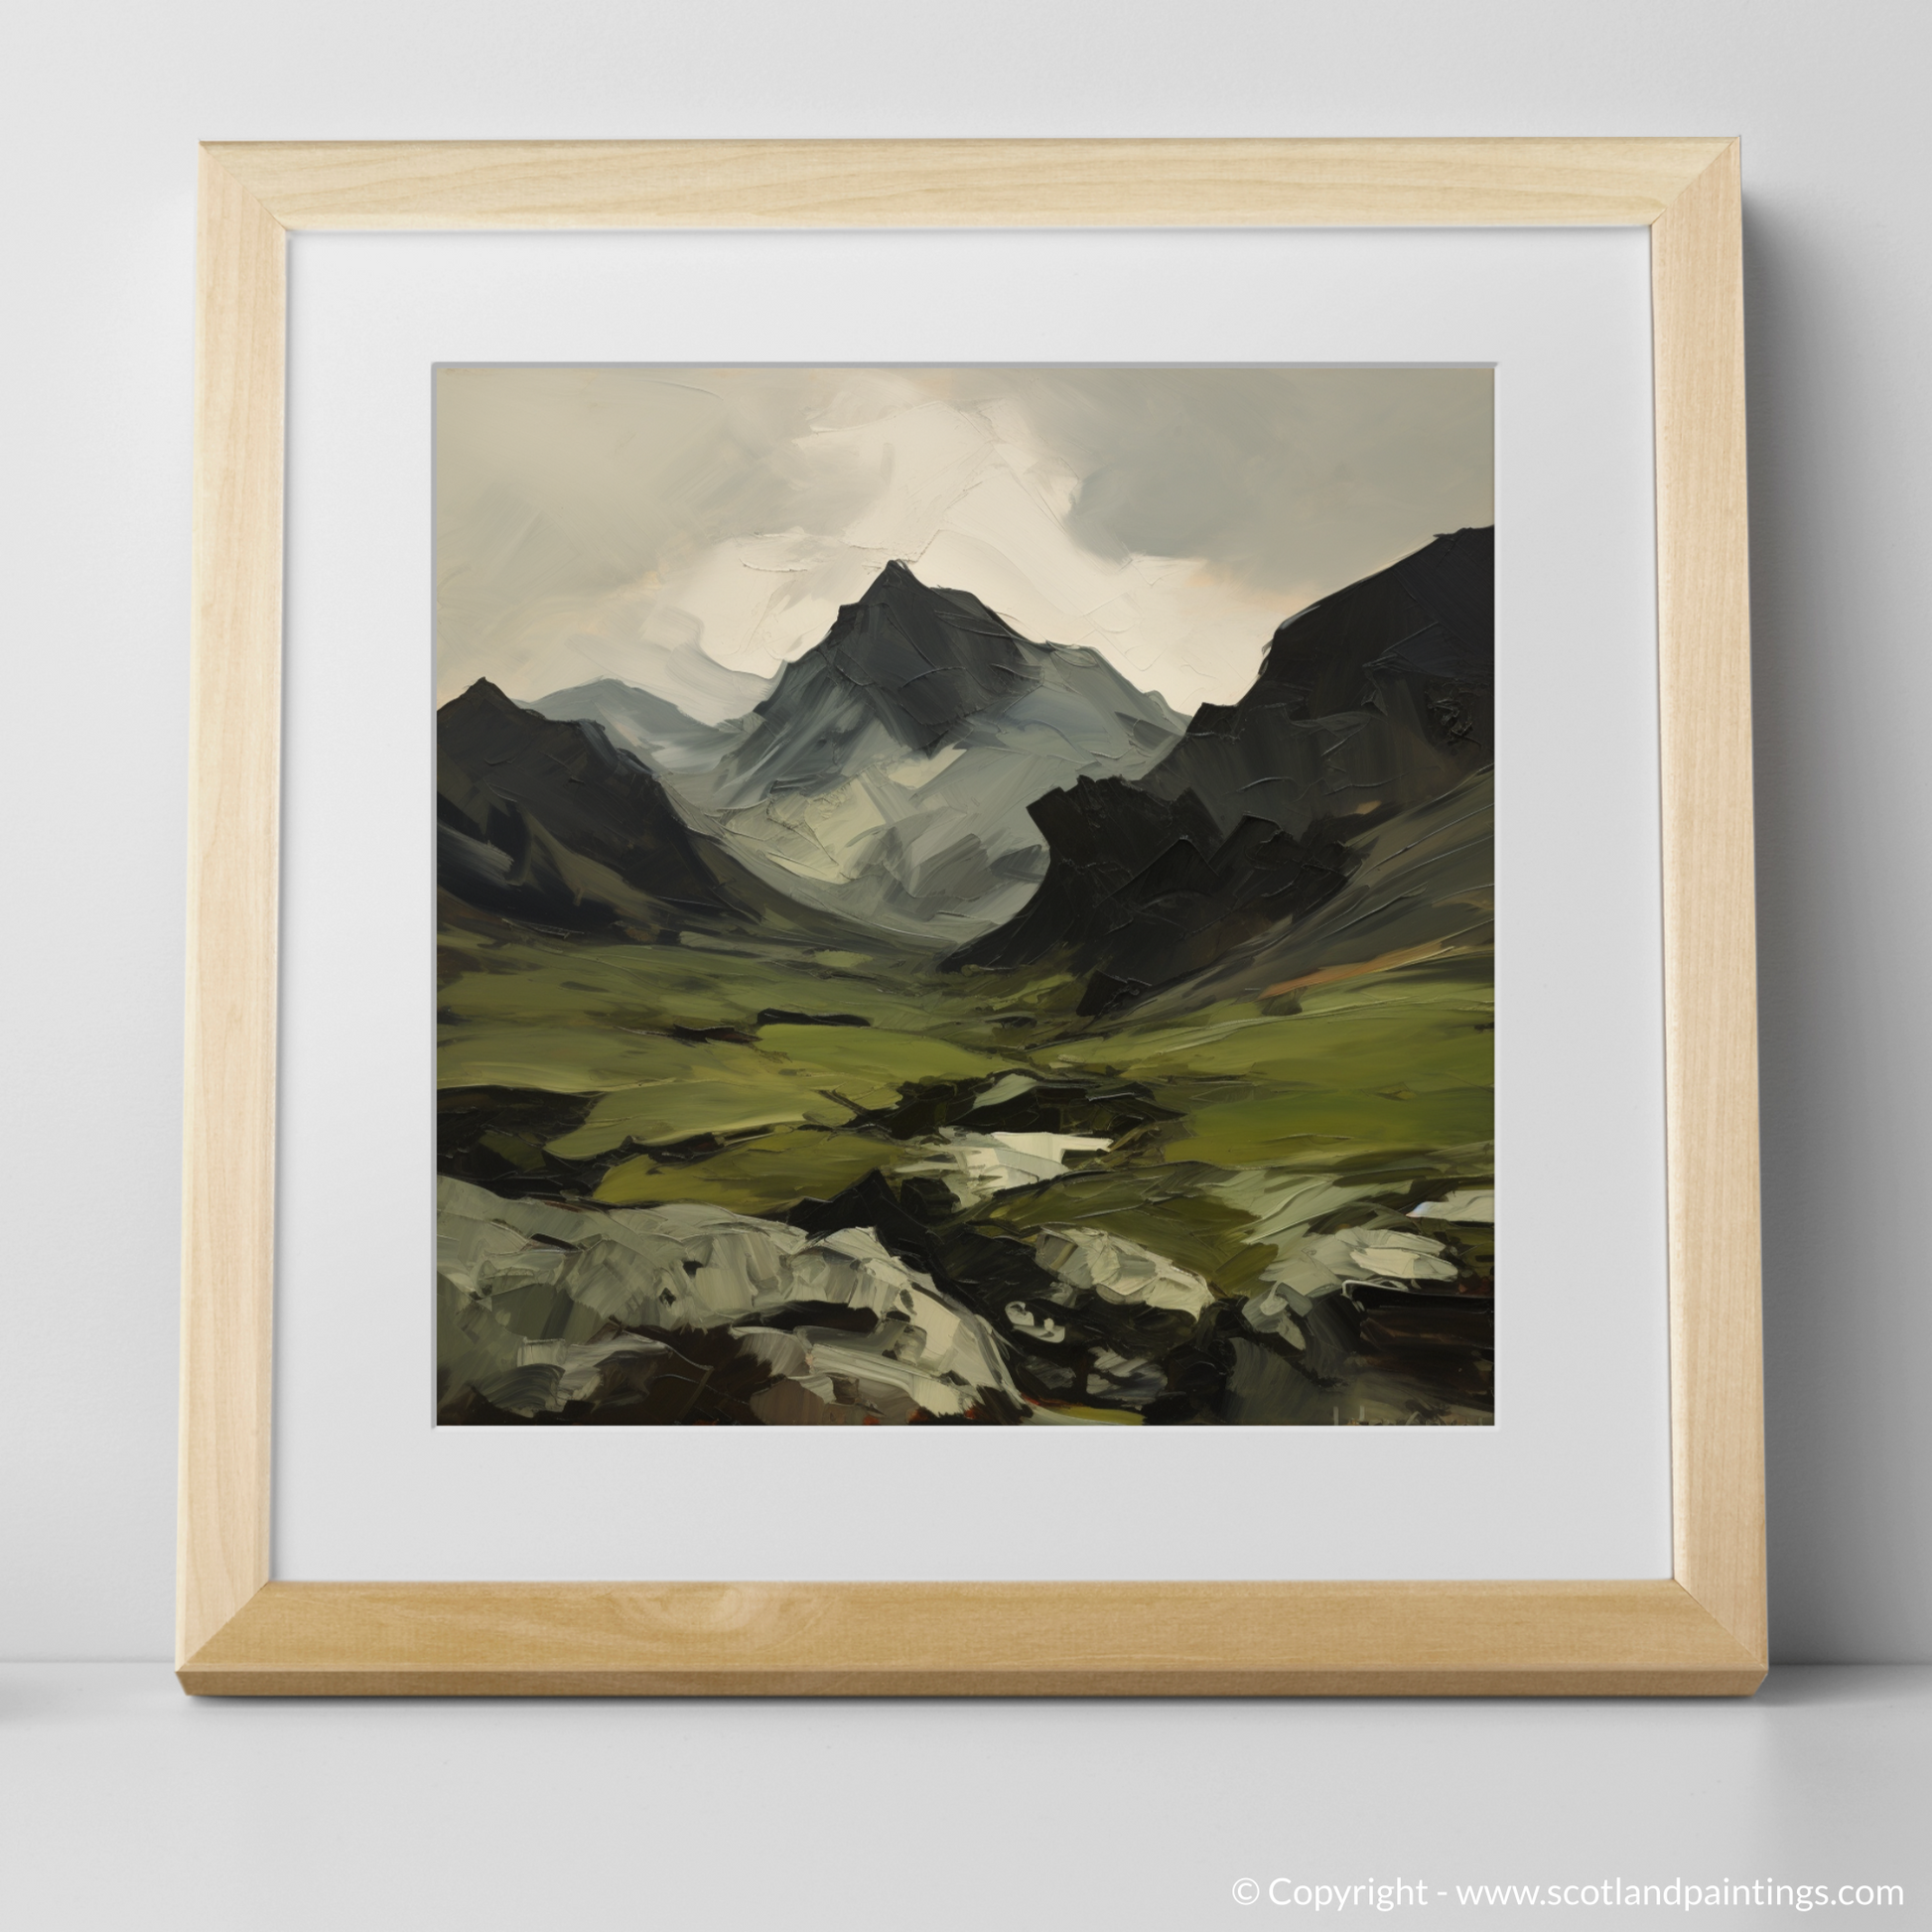 Art Print of Ben Vane with a natural frame